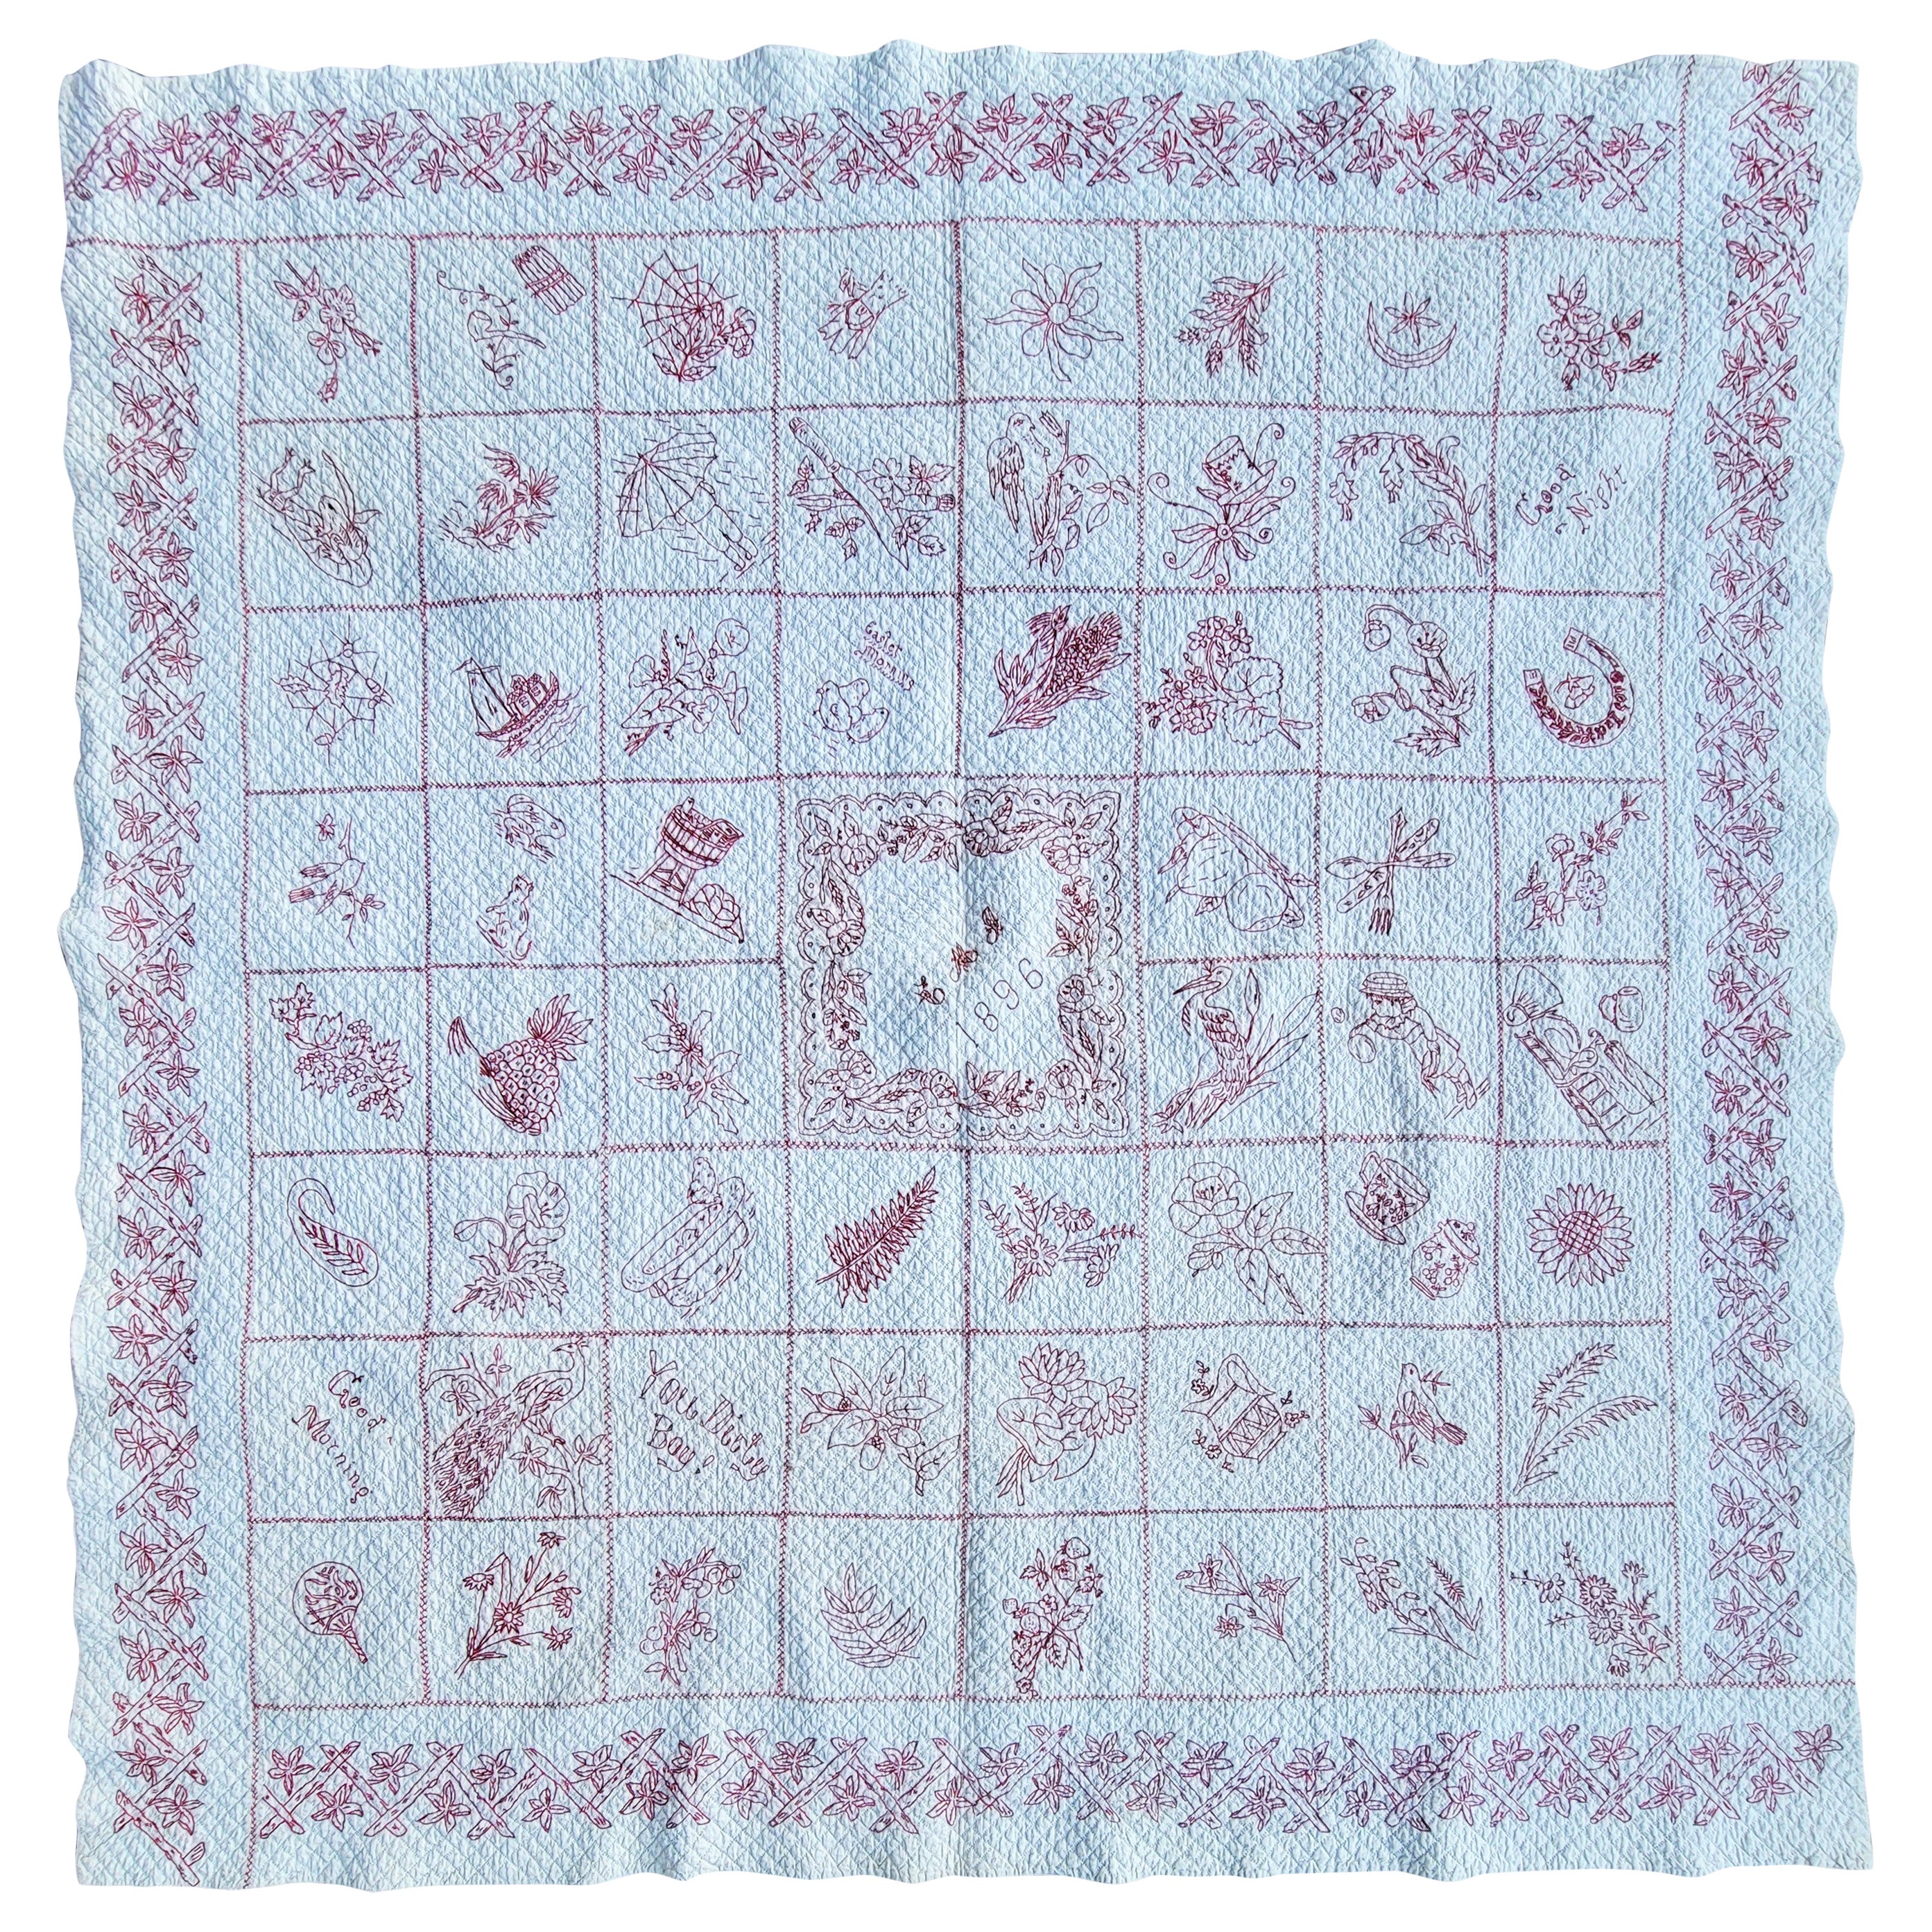 19th C Signed & Dated 1898 Embroidered Sampler Quilt For Sale